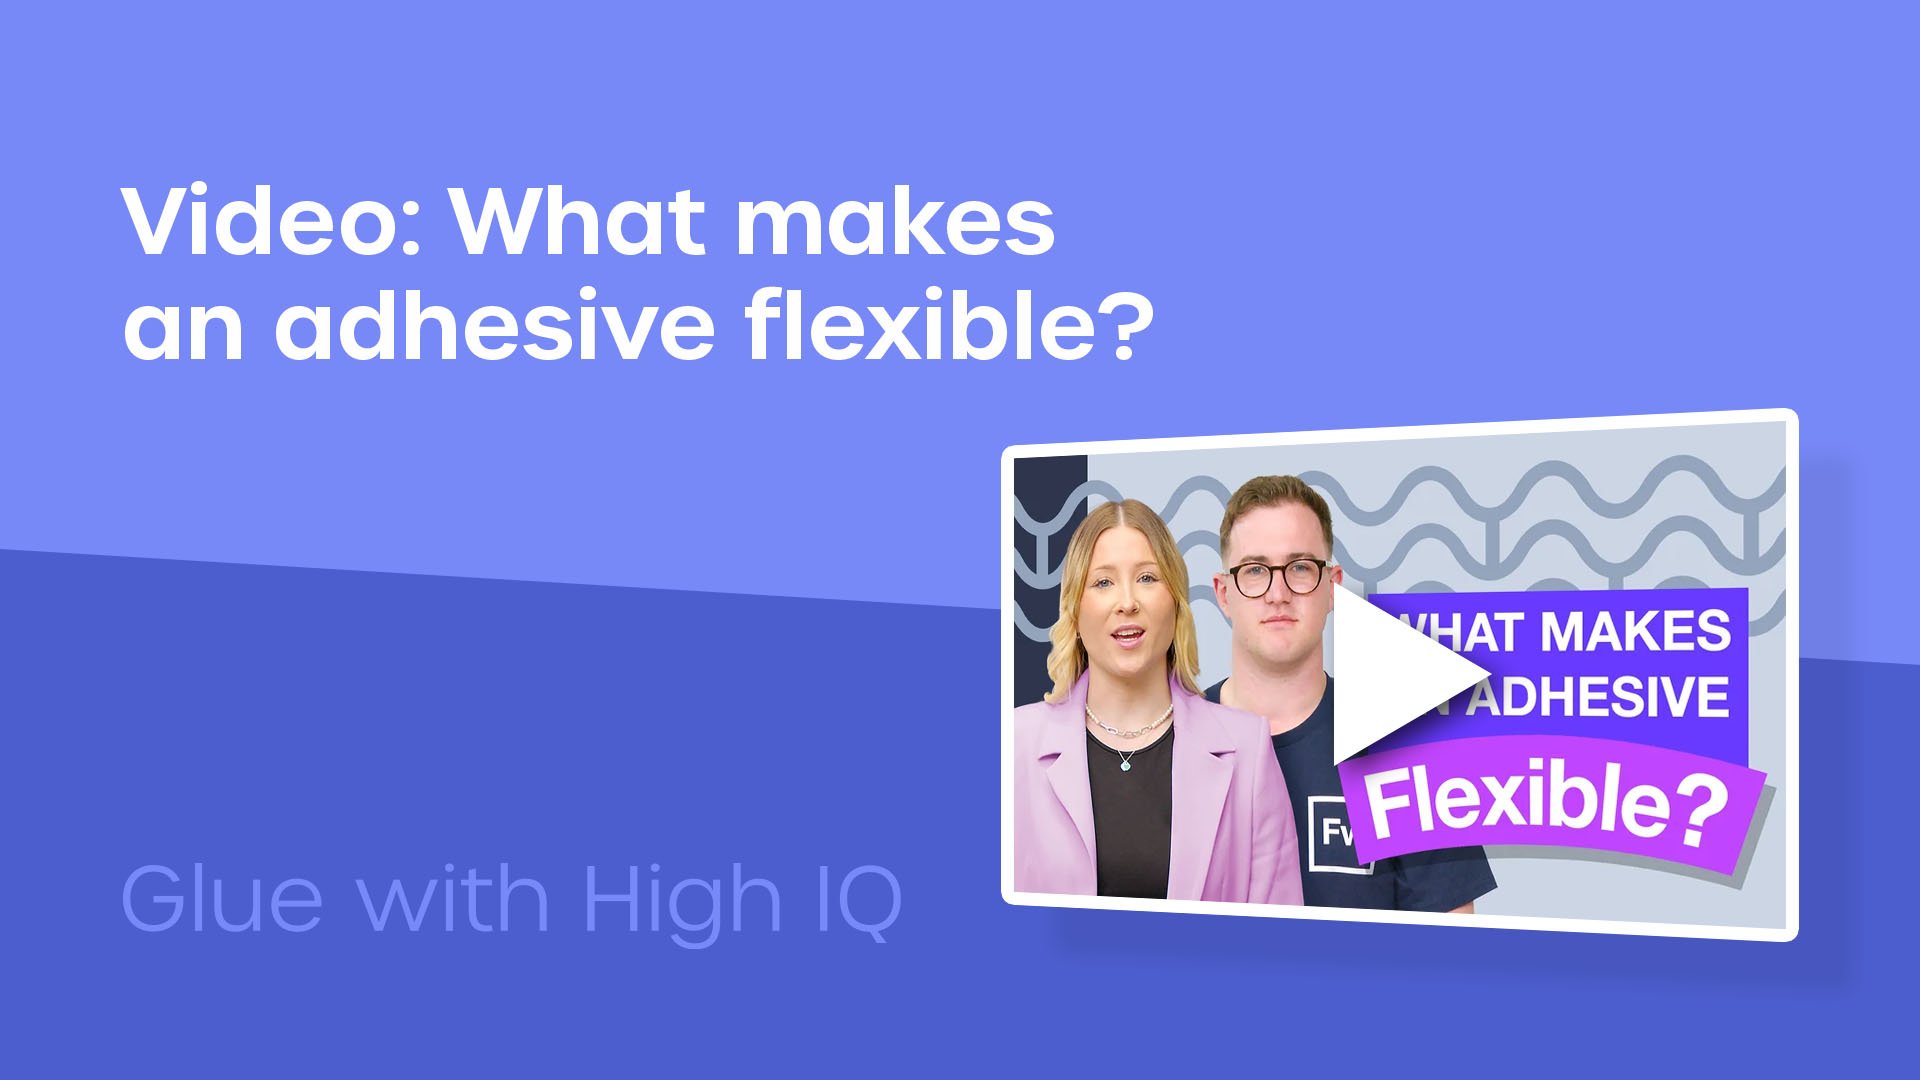 What is a flexible adhesive?